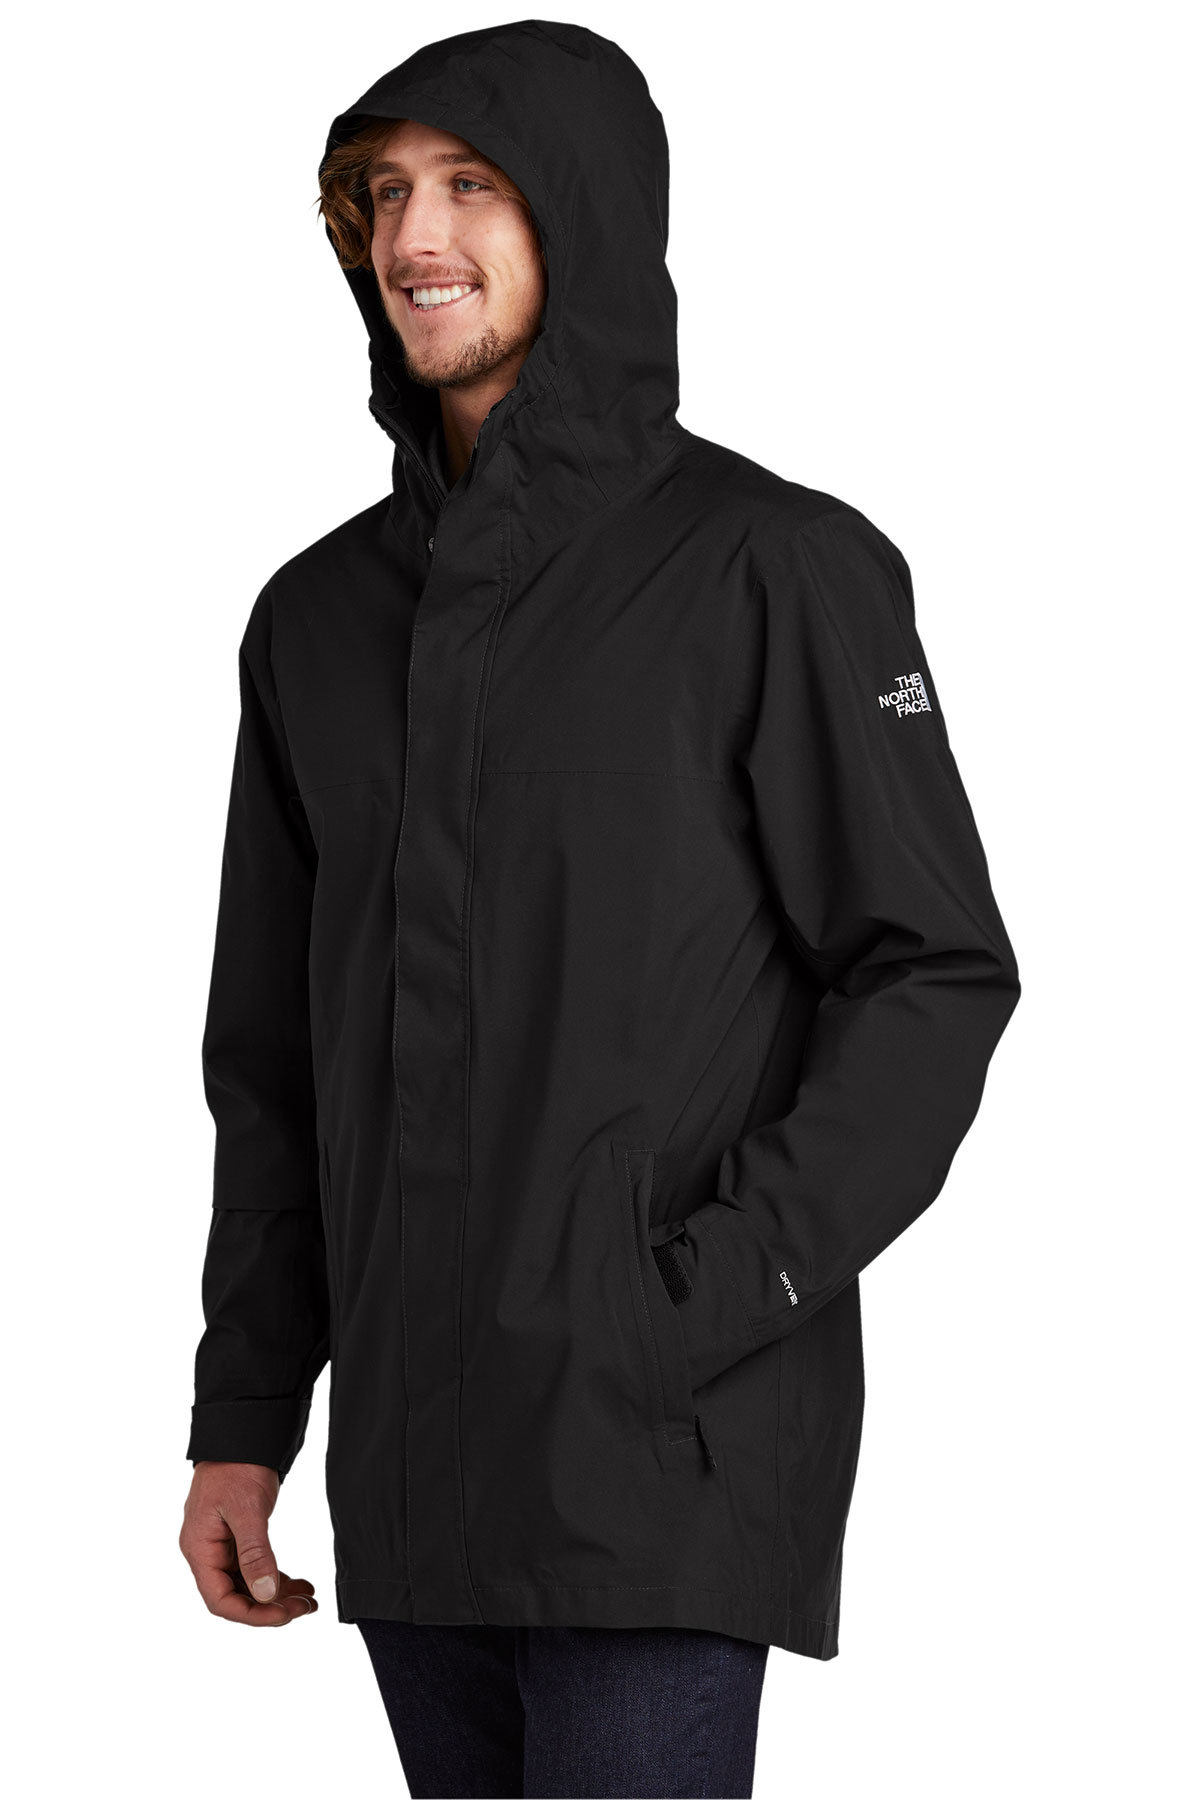 aanpassen Hoogte Vakantie The North Face City Parka | Product | Company Casuals